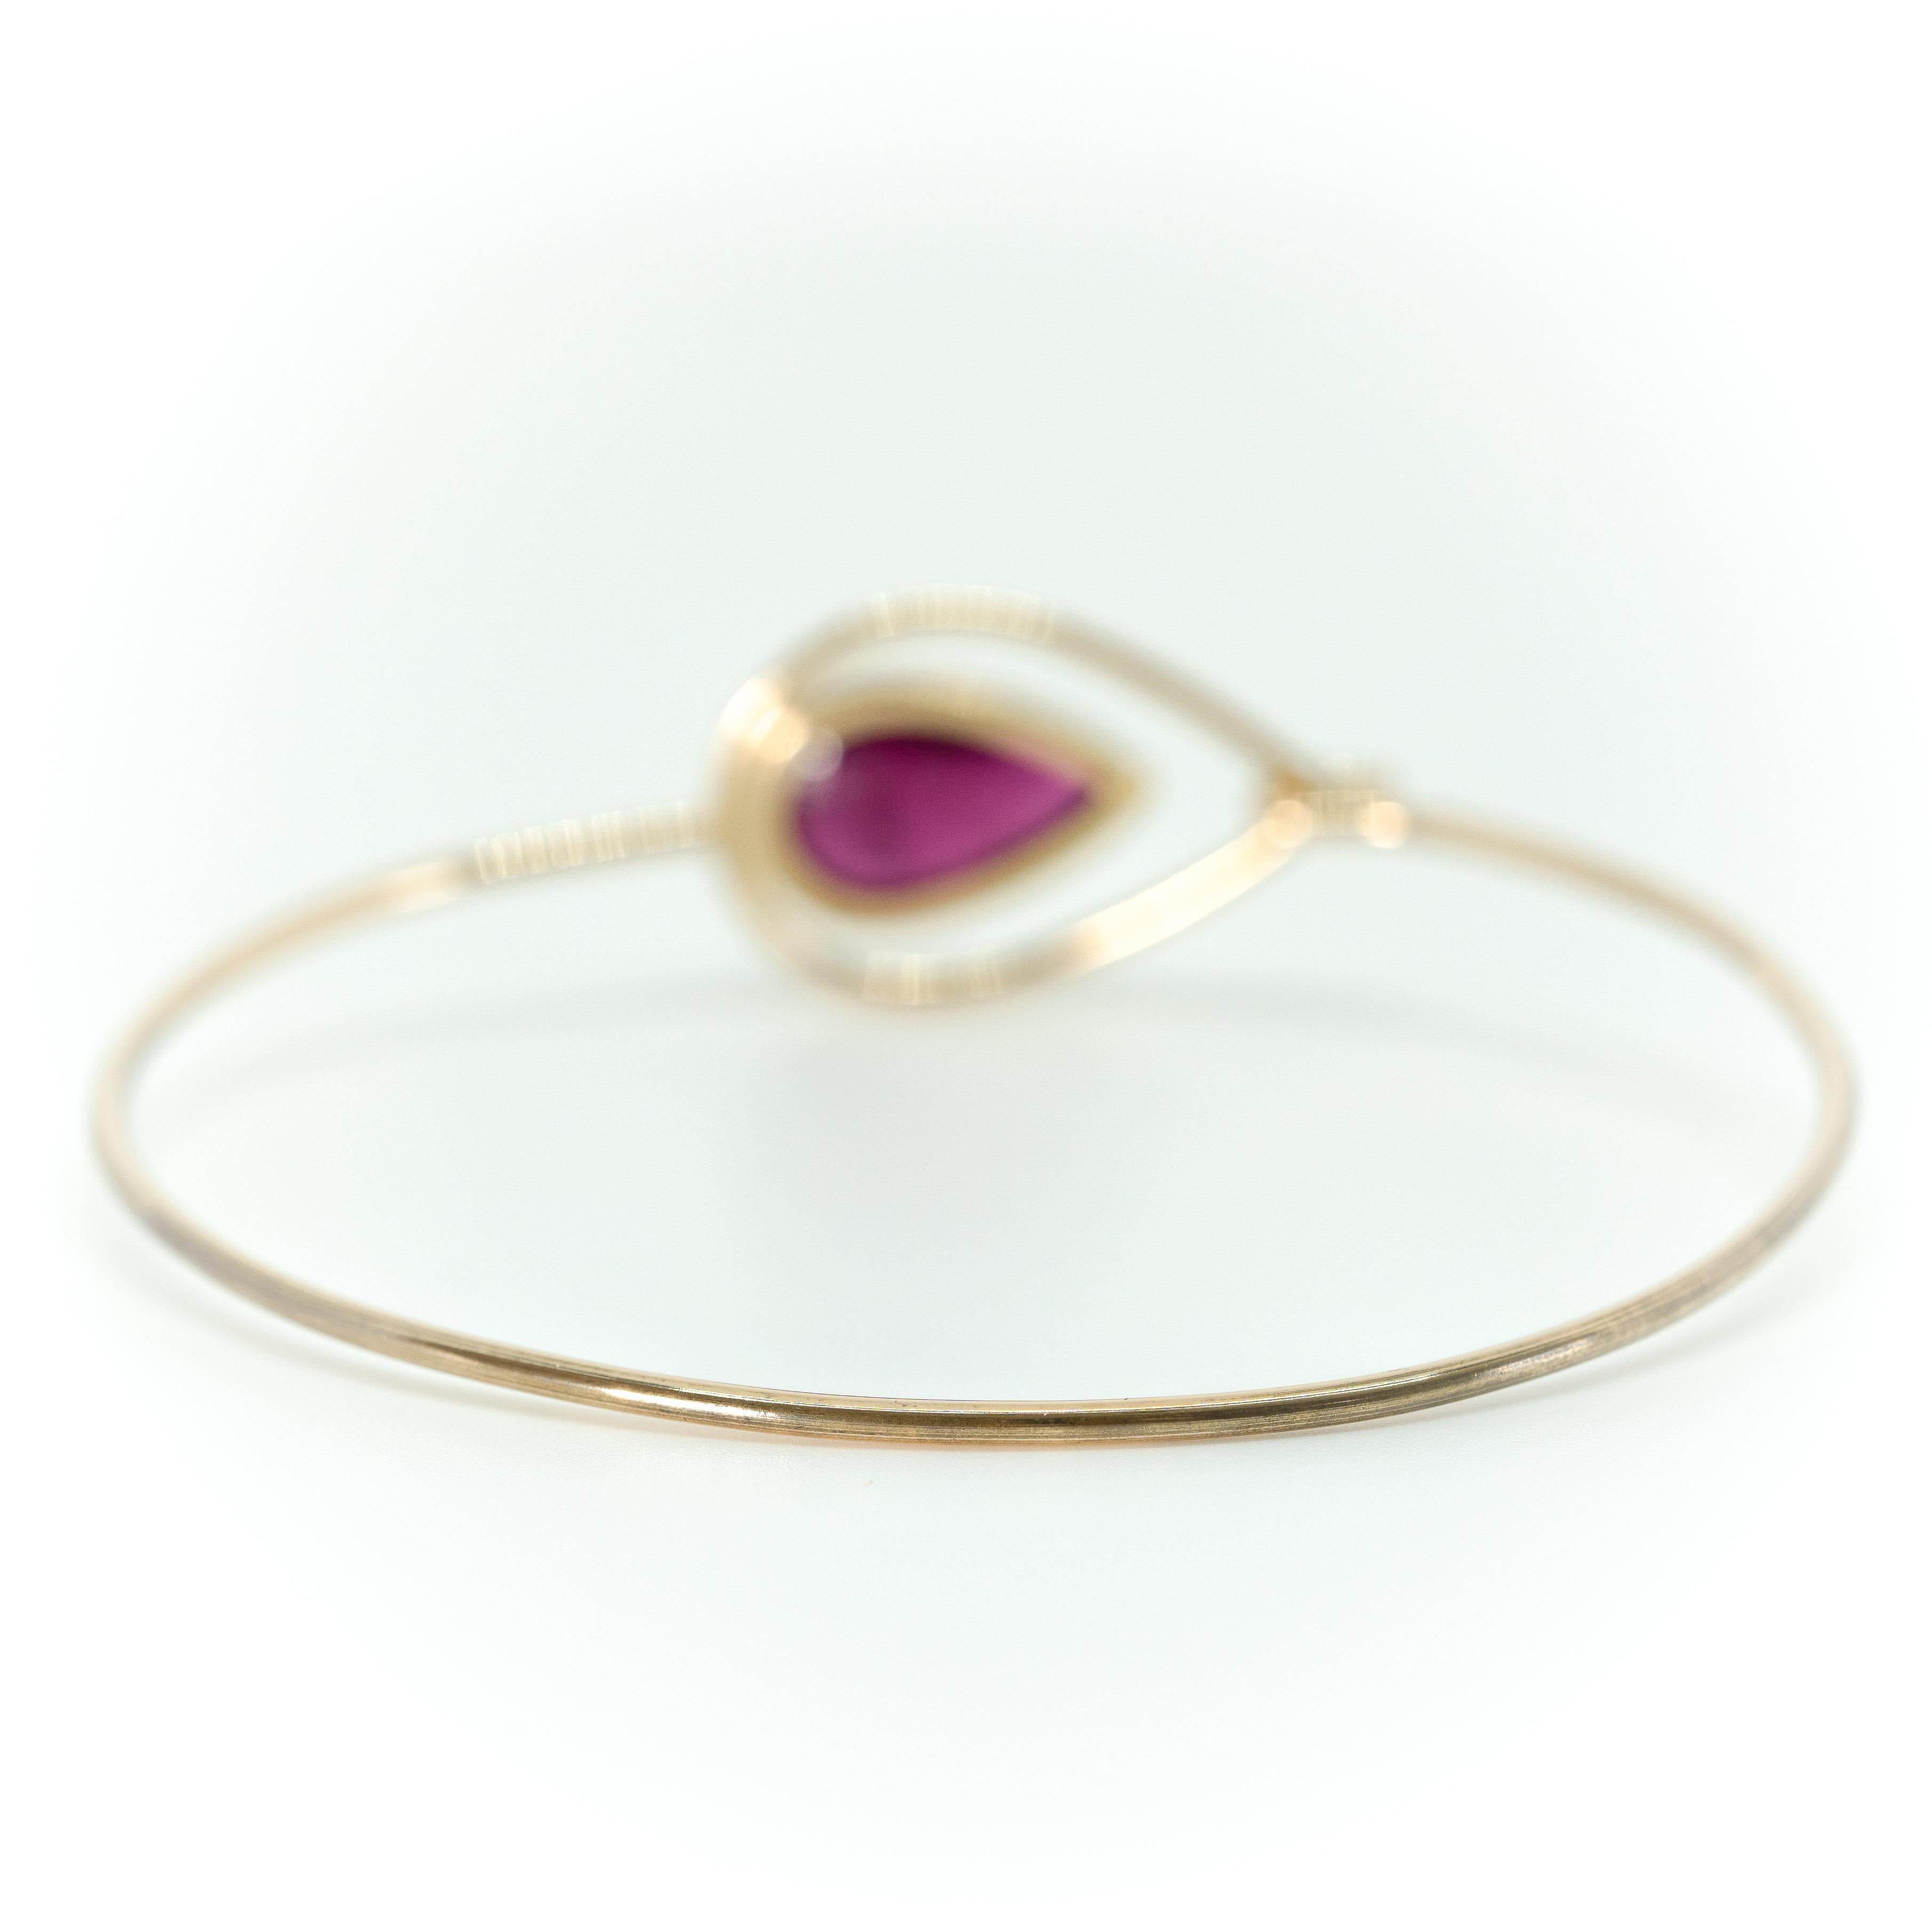 Women's or Men's A Bangle Bracelet in 18 Yellow Gold Set with a Pink Tourmaline Cabochon For Sale